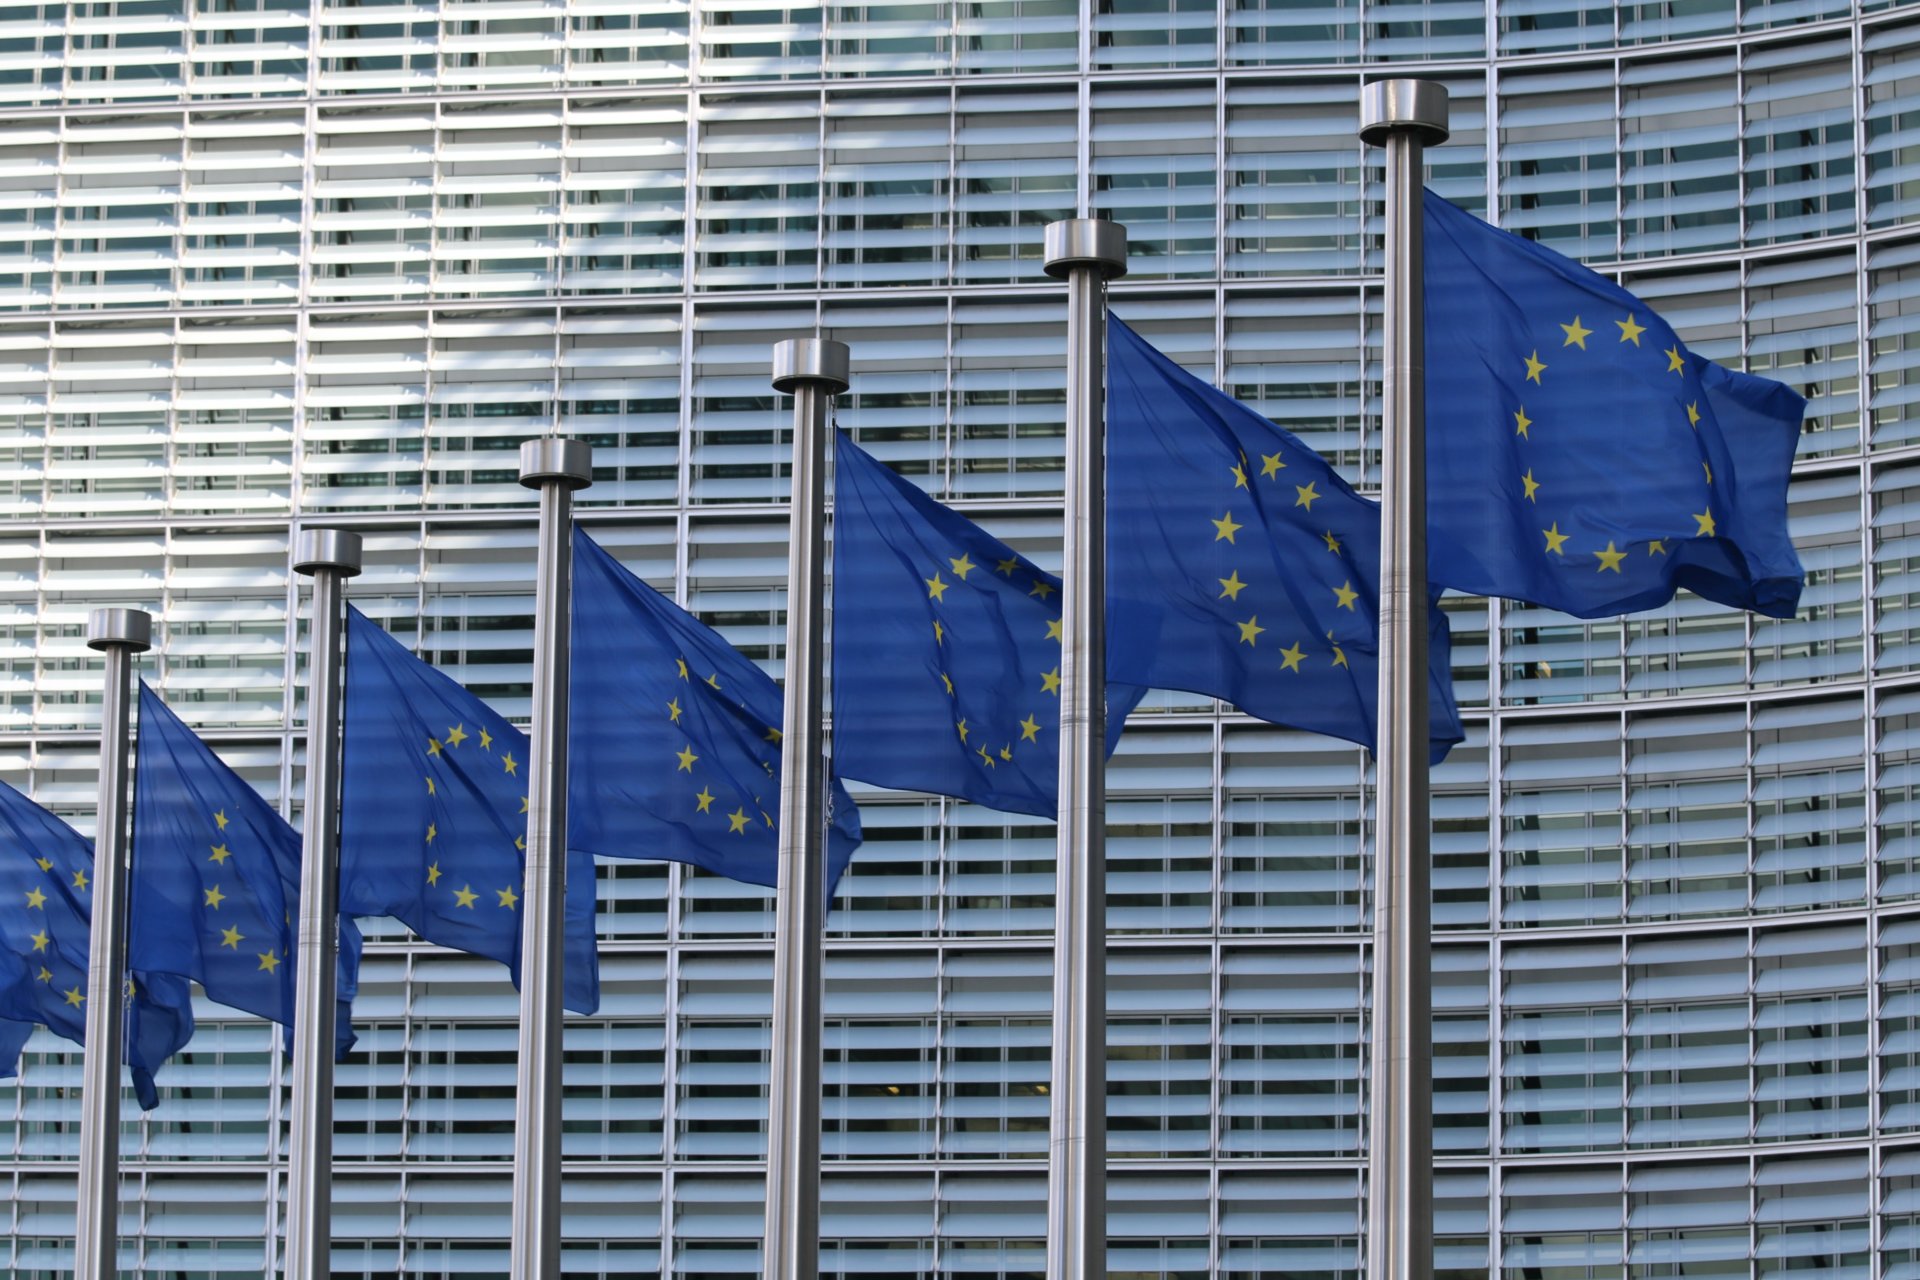 seven European flags are lined up outside a building